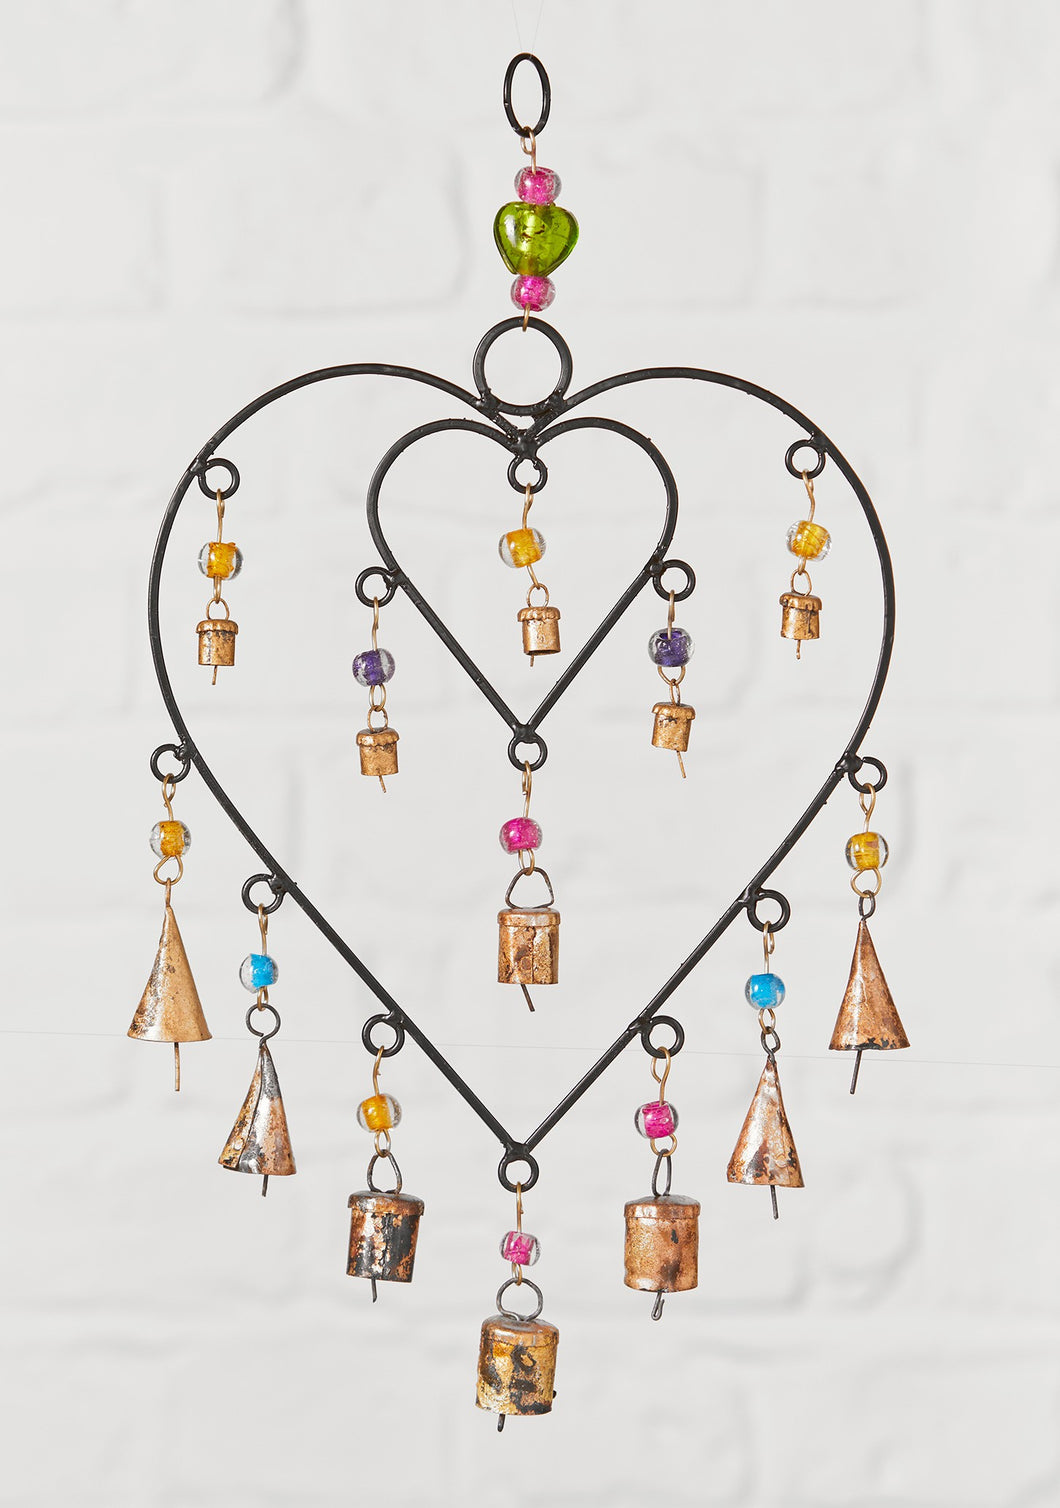 Double Connected Recycled Iron Heart Windchime with Beads